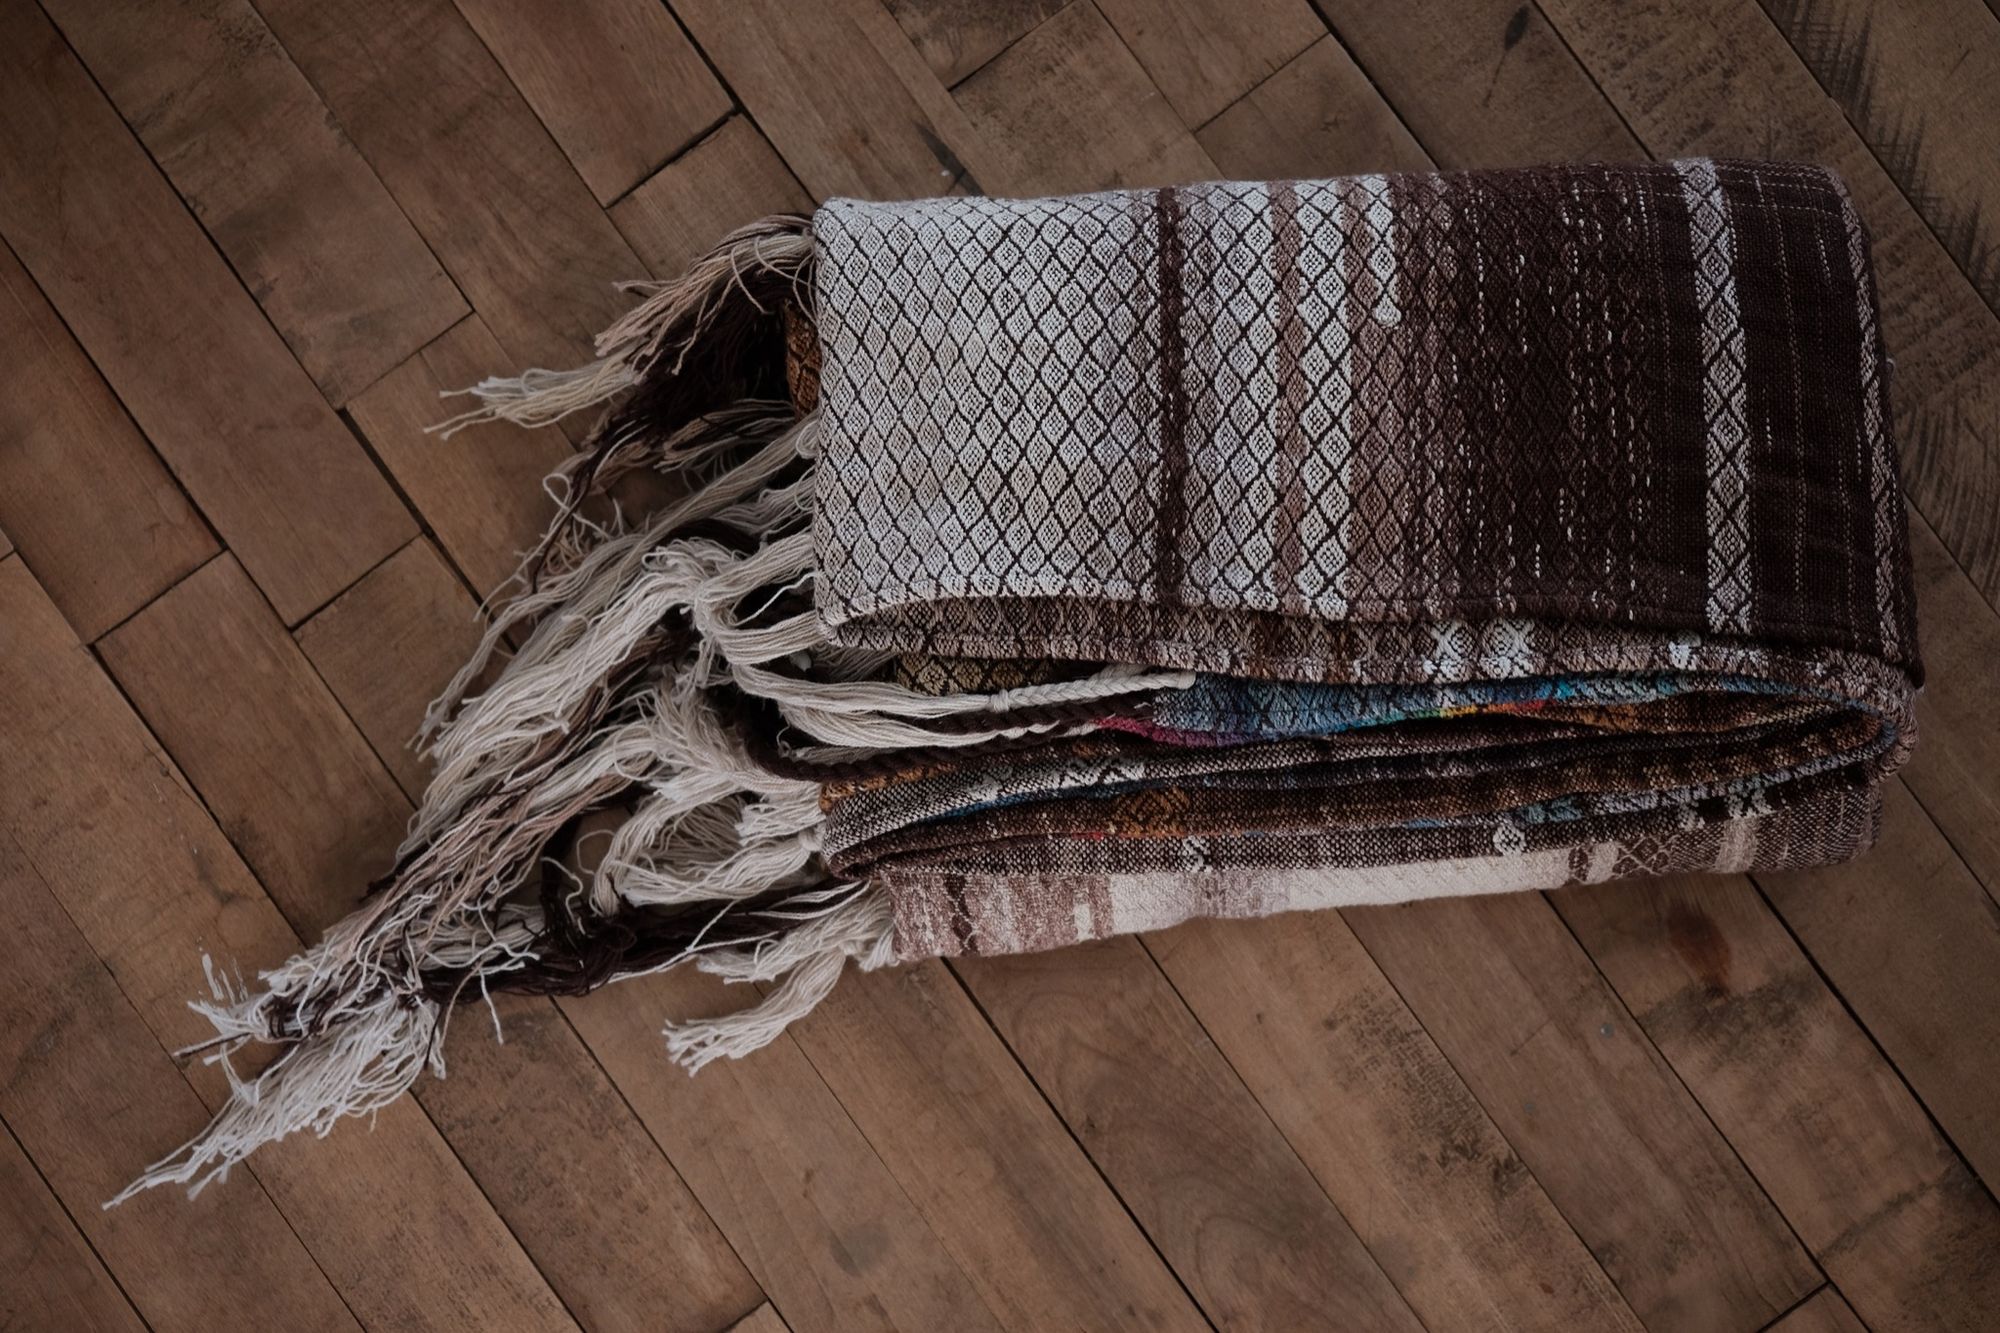 Handwoven fabric with a diamond pattern in brown, cream, white and rainbow colors, folded on a wood floor